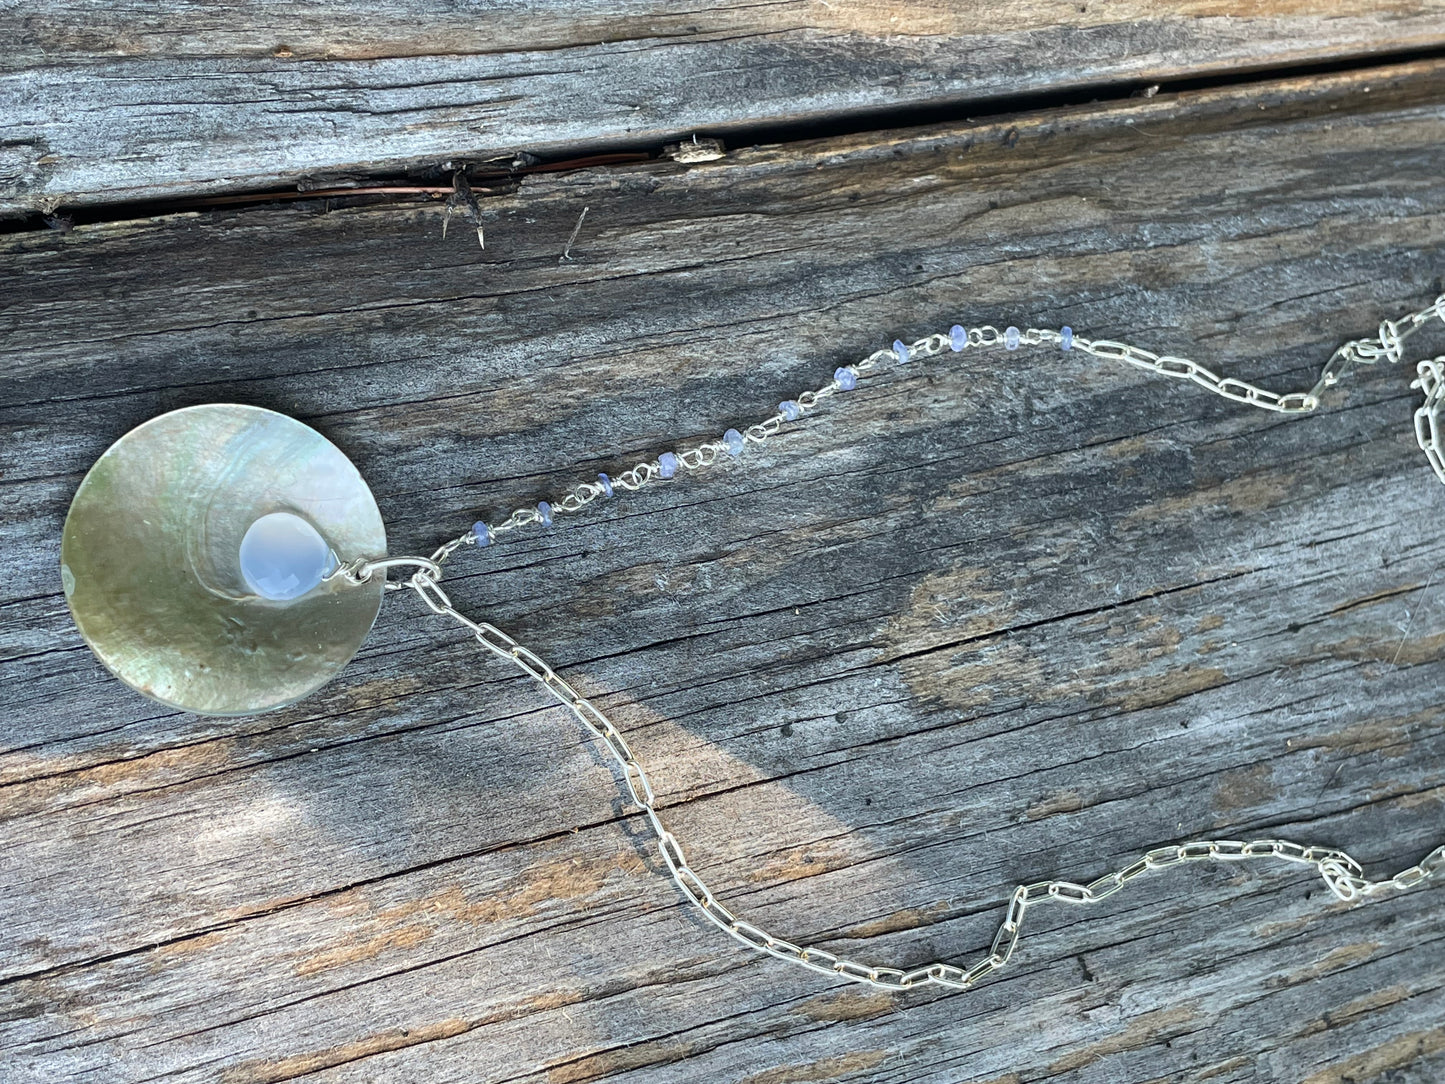 Mother of pearl chalcedony necklace